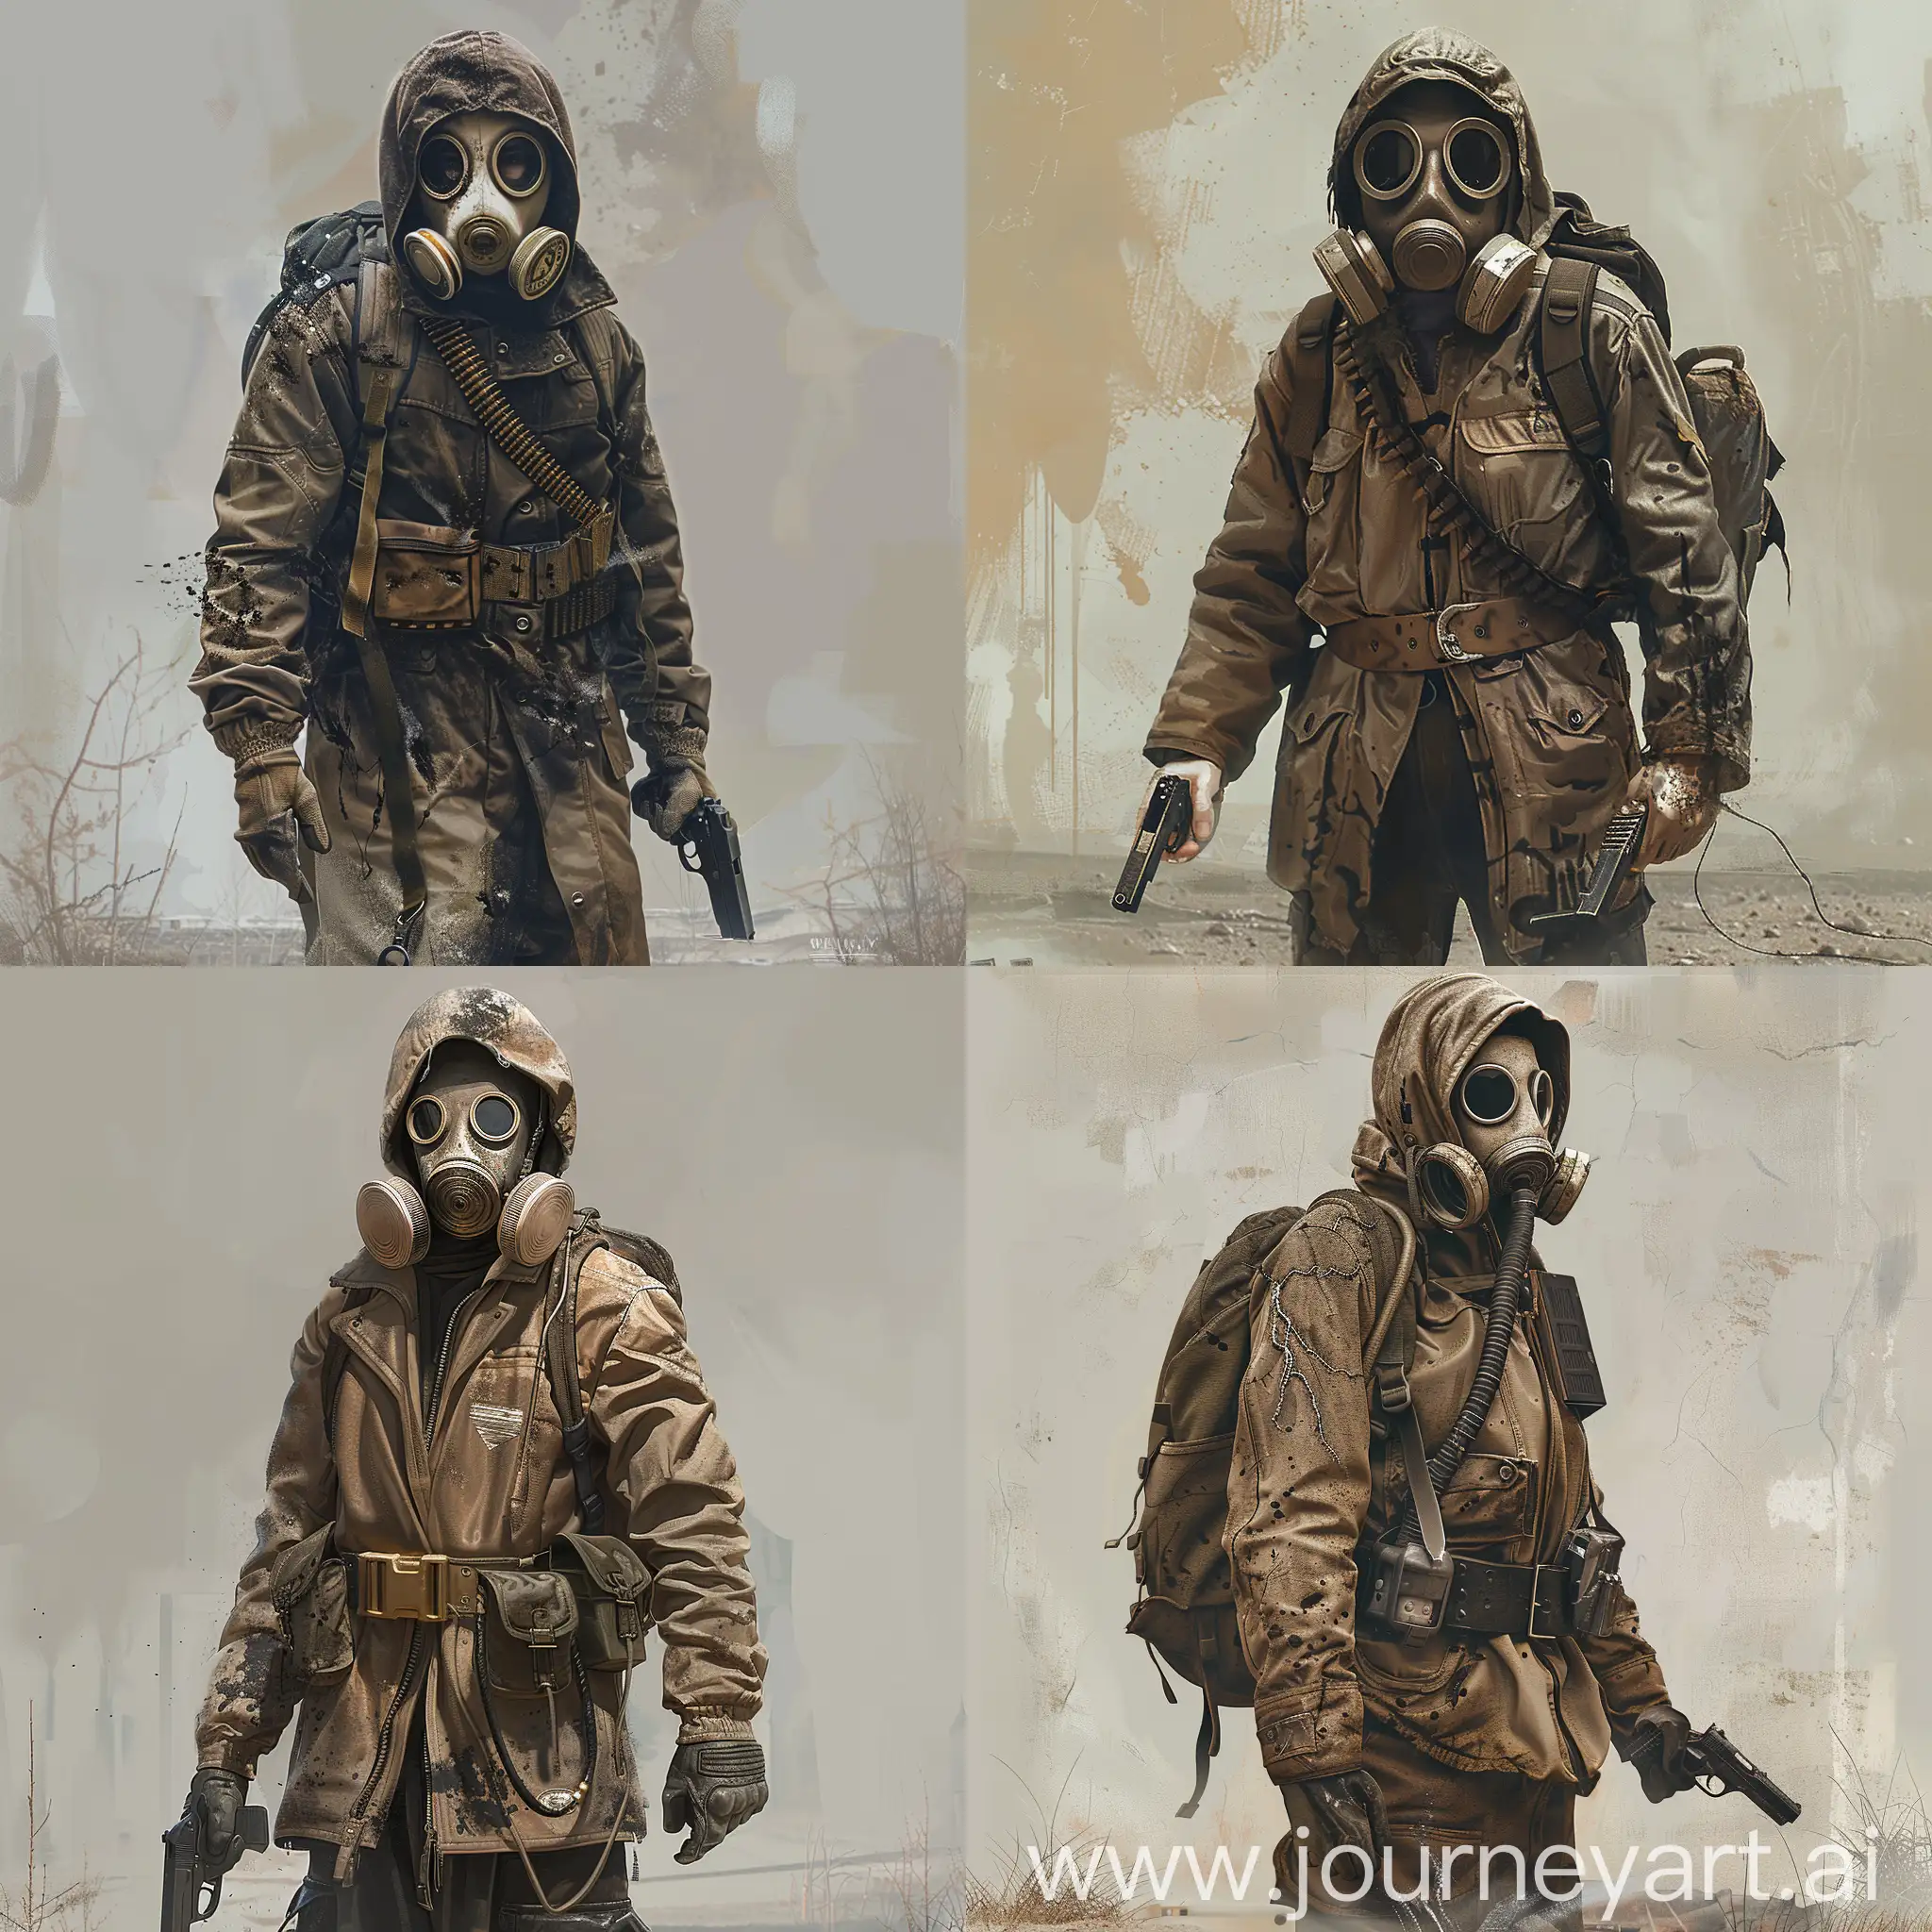 Concept art character, comics style, The stalker is a lone newcomer, a gasmask, a dirty light brown jacket, a Soviet belt, a small backpack on his back, a military discharge on his body, a pistol in one hand.